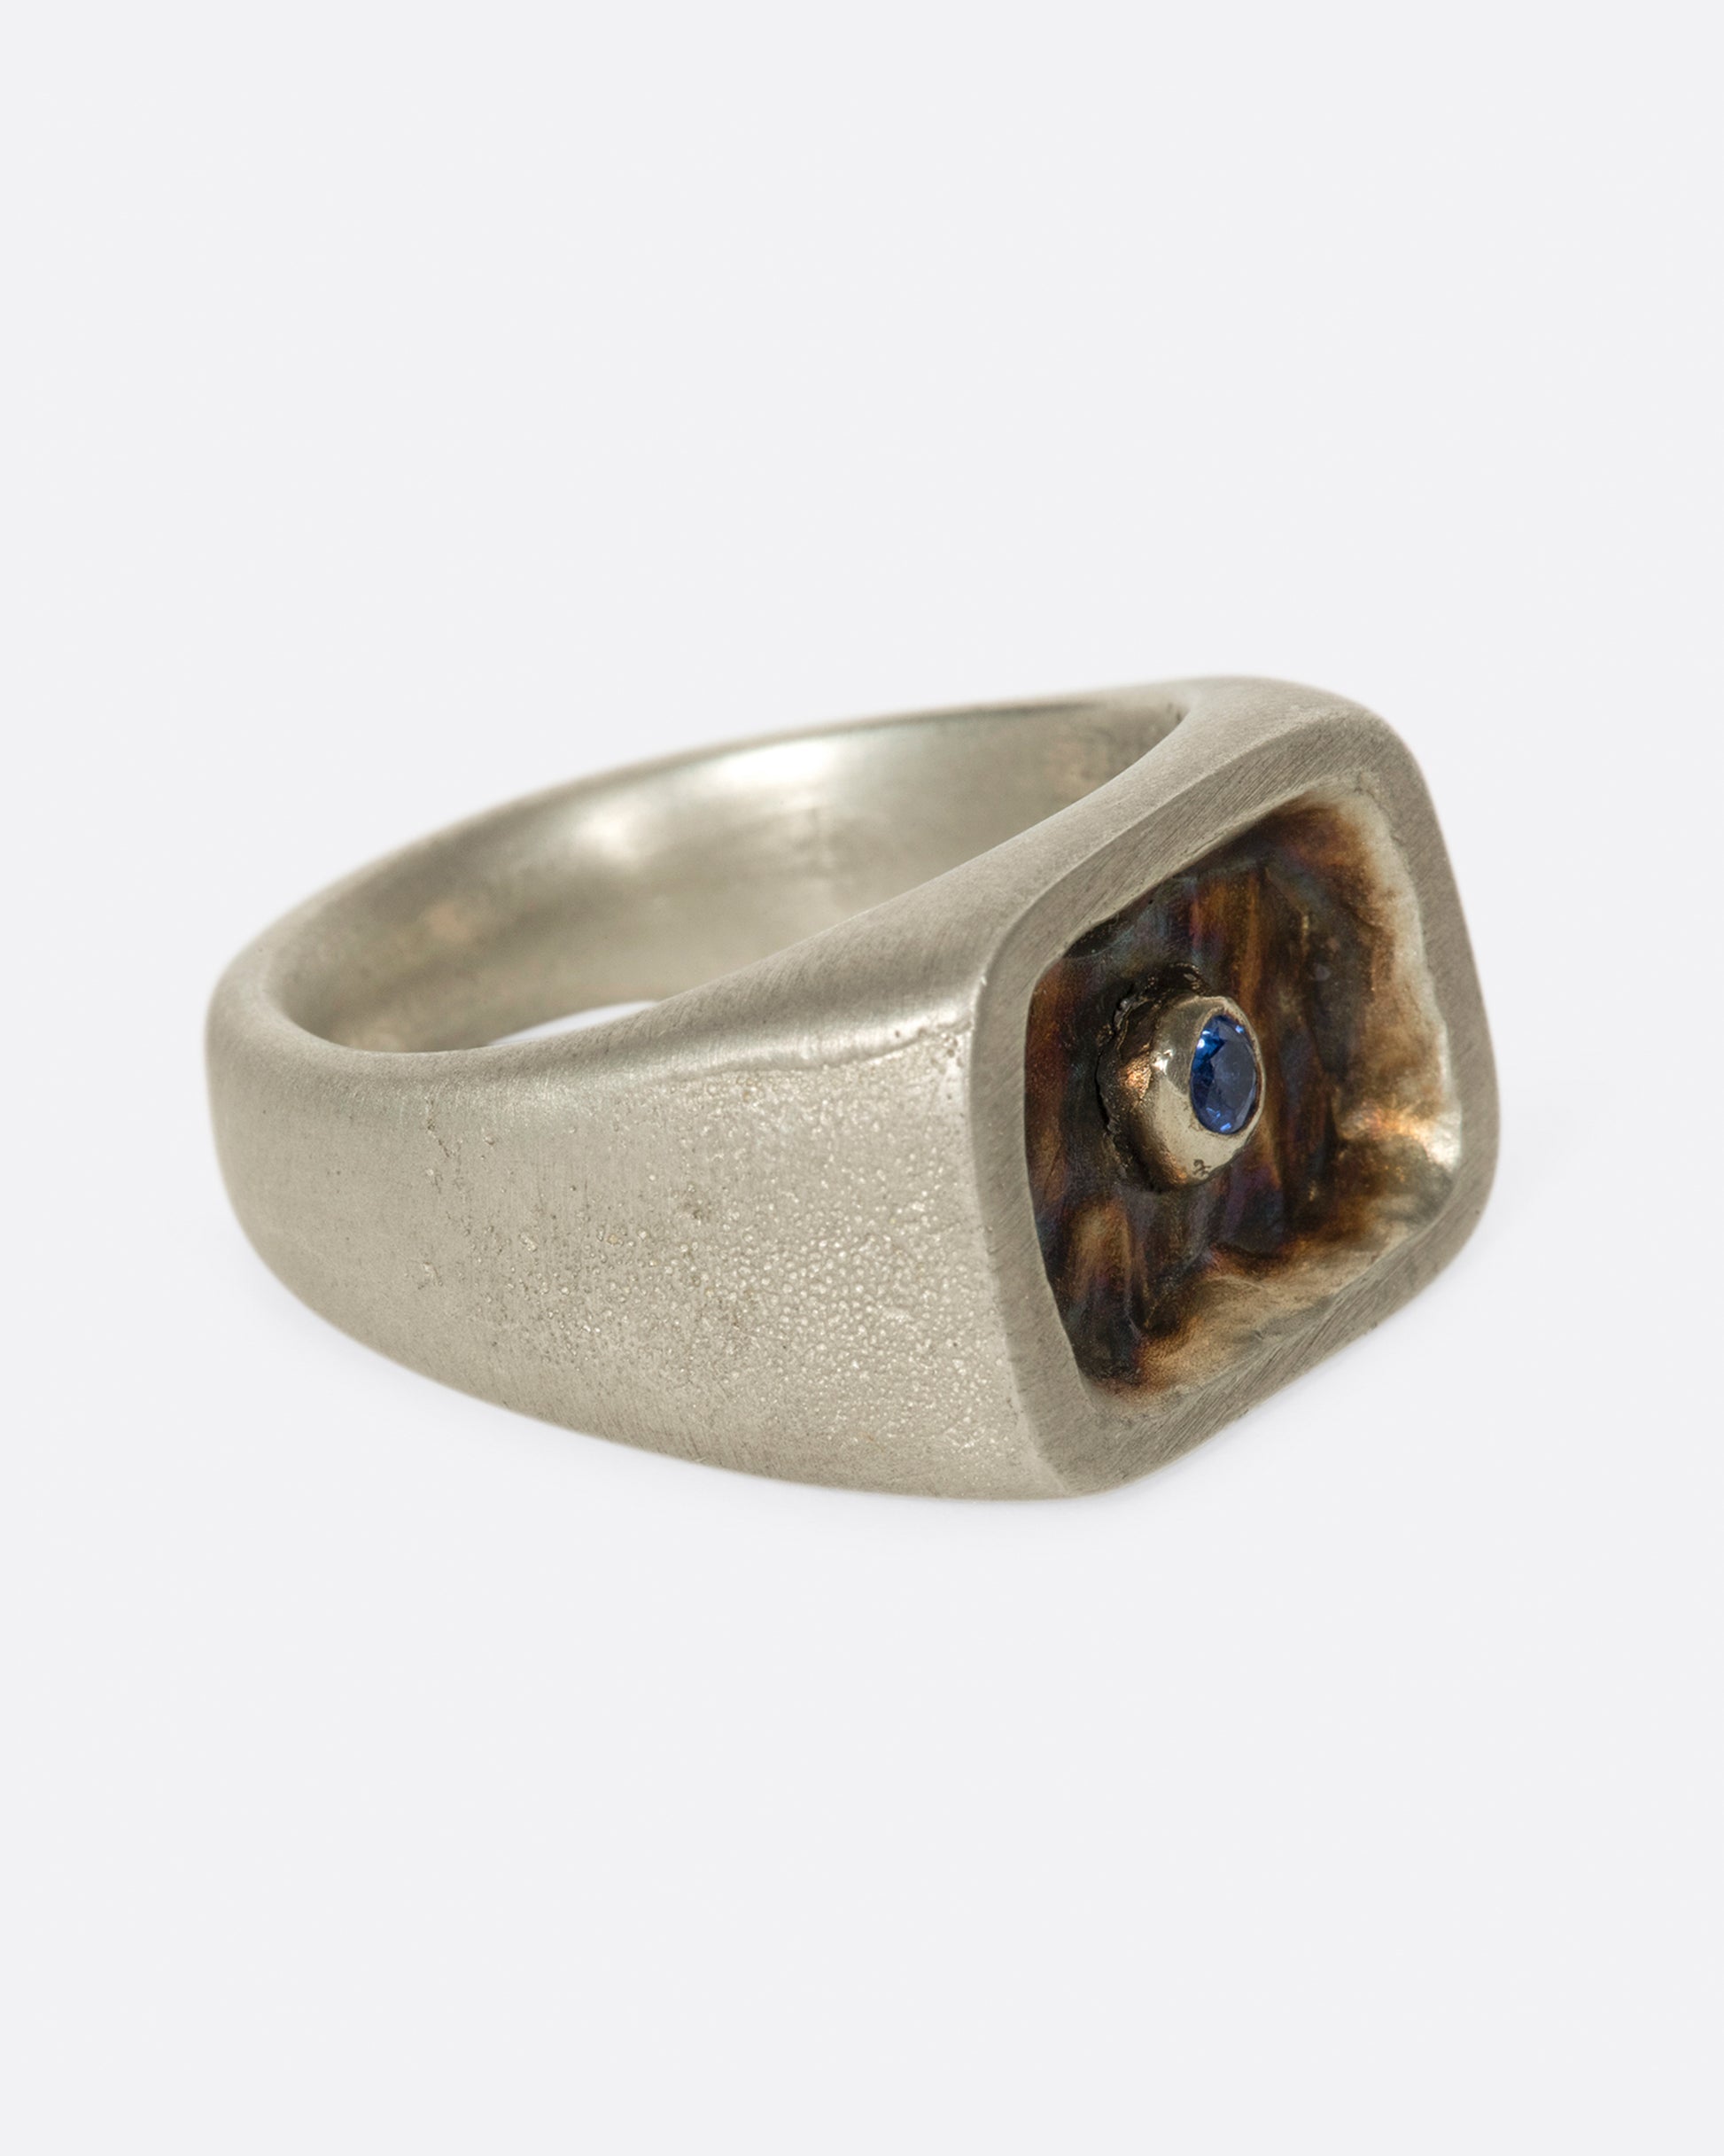 A solid, hand carved signet ring with gold plating and a royal blue sapphire.